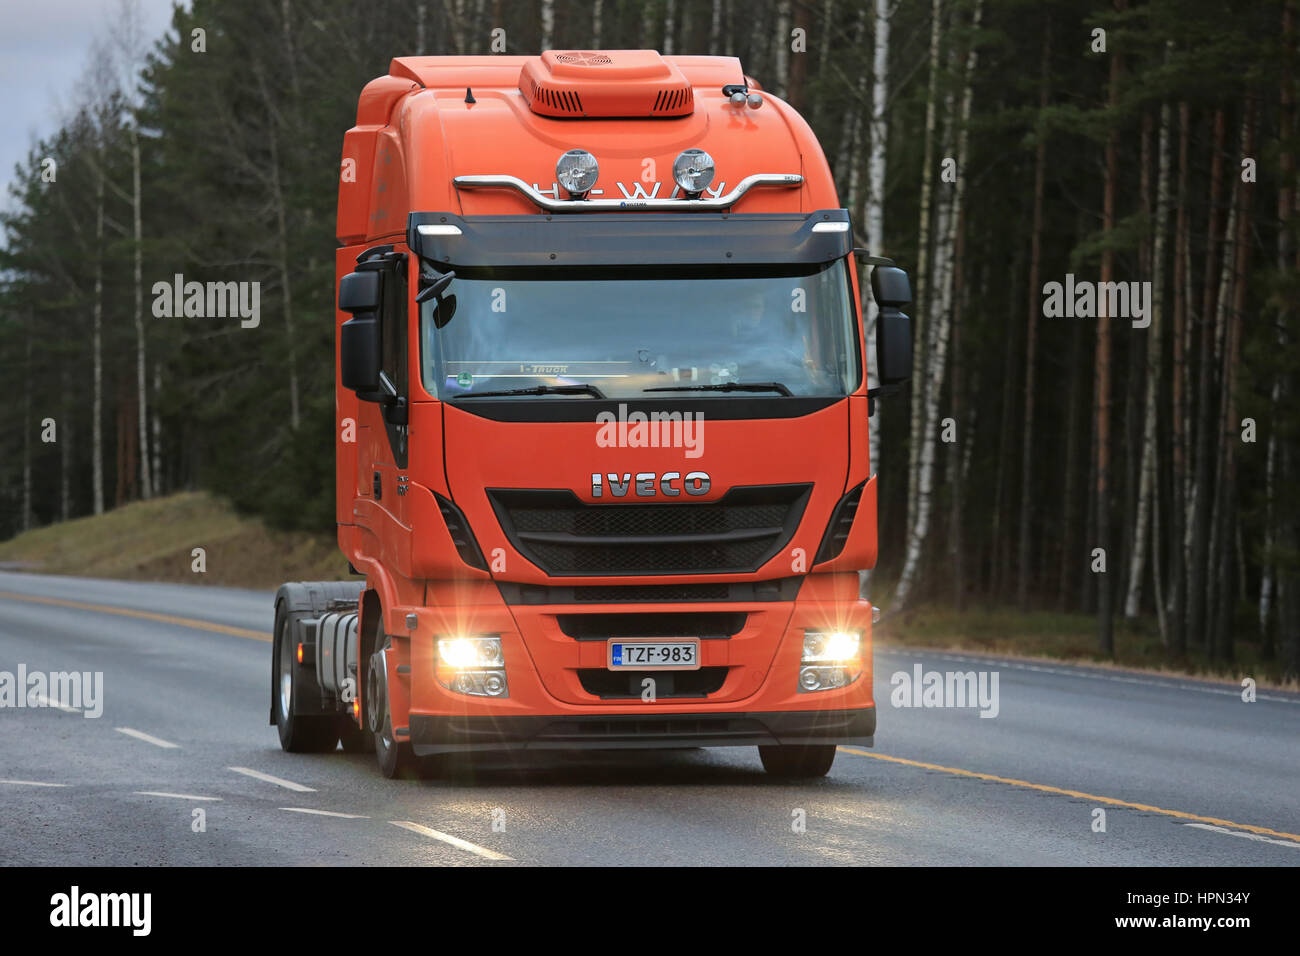 Iveco Truck Cab High Resolution Stock Photography and Images - Alamy